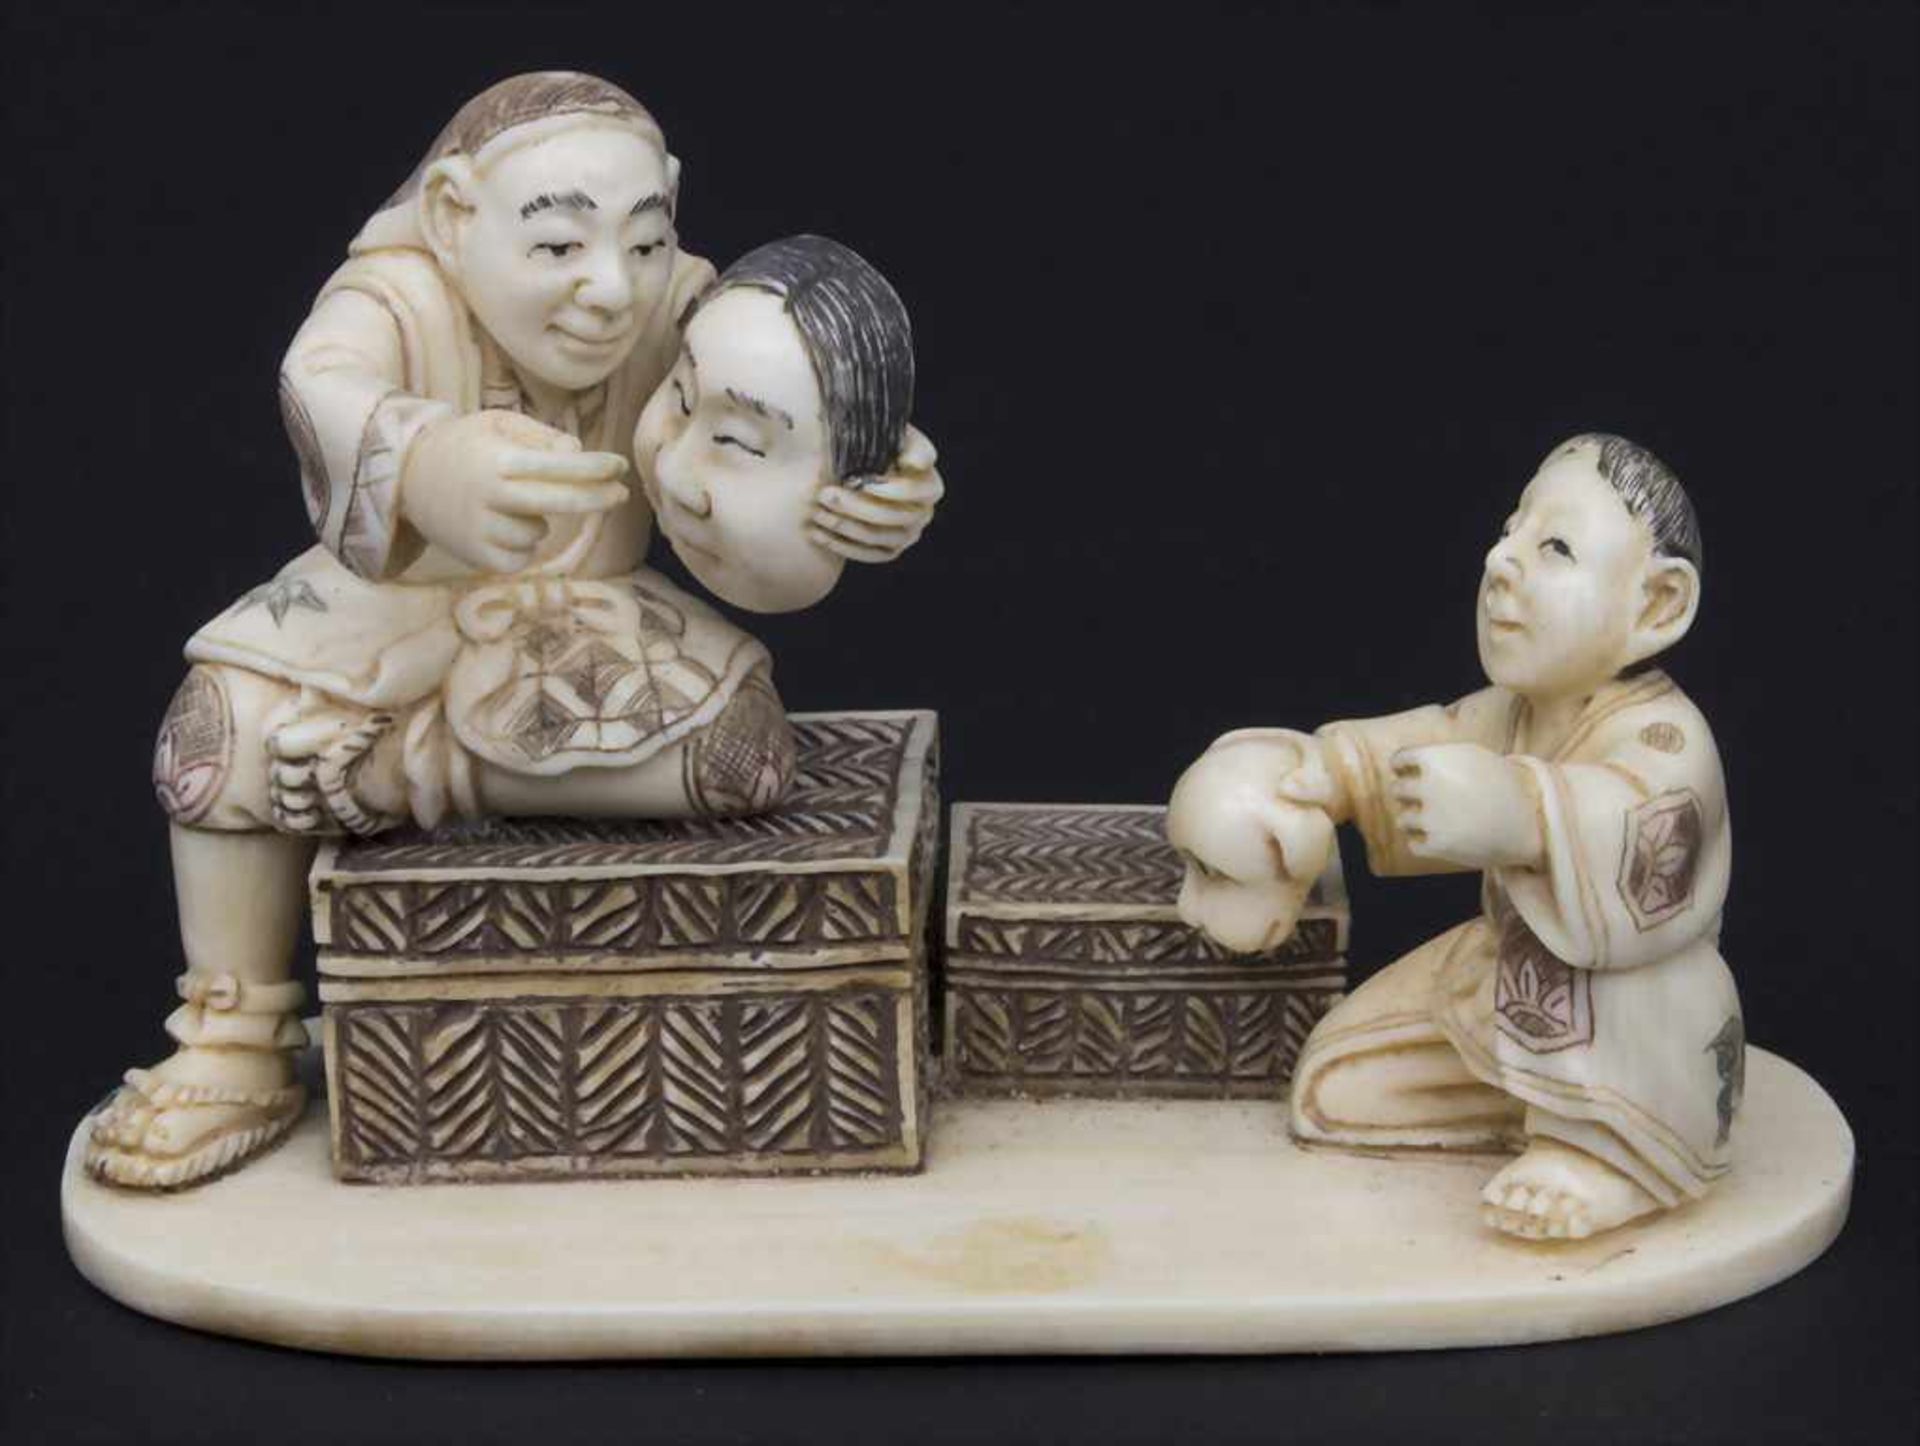 Figurengruppe 'Vater und Sohn' / A figural group 'Father and son', Japan, um 1900Material: